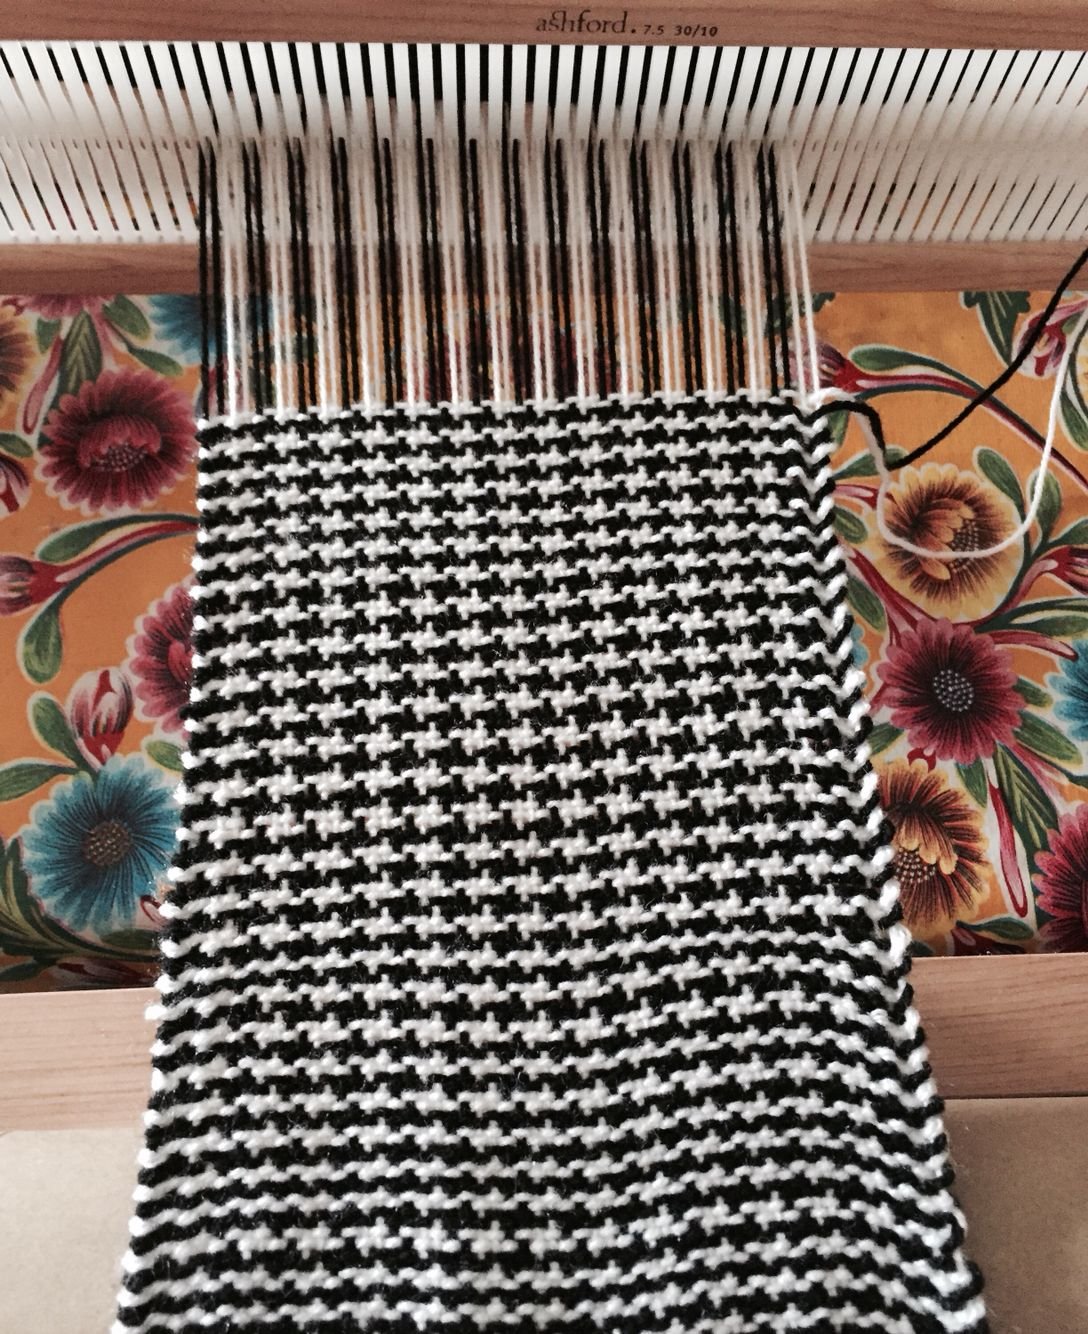 Intro to Houndstooth Weaving